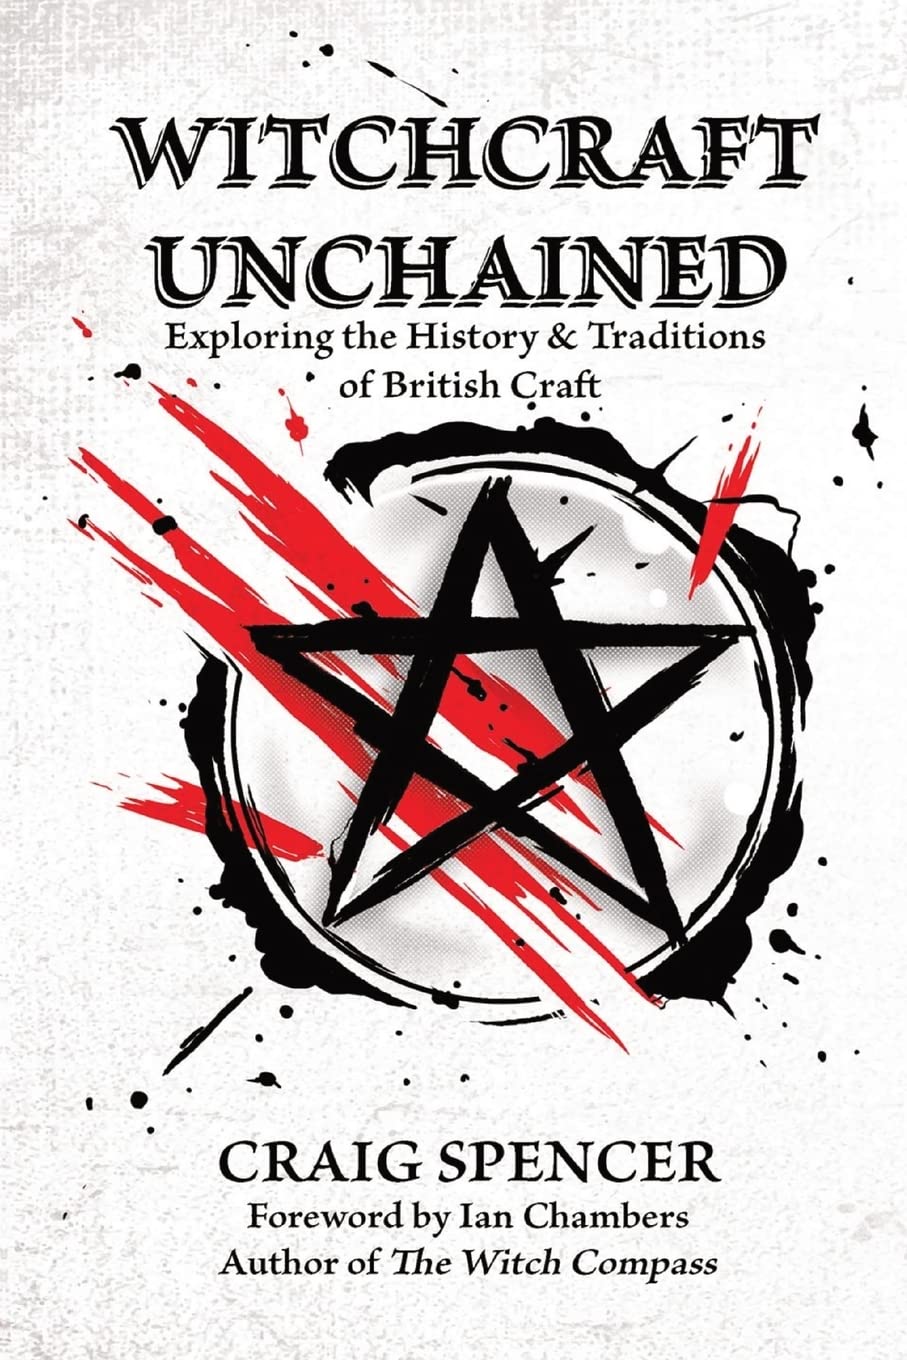 Witchcraft Unchained: Exploring the History & Traditions of British Craft by Craig Spencer